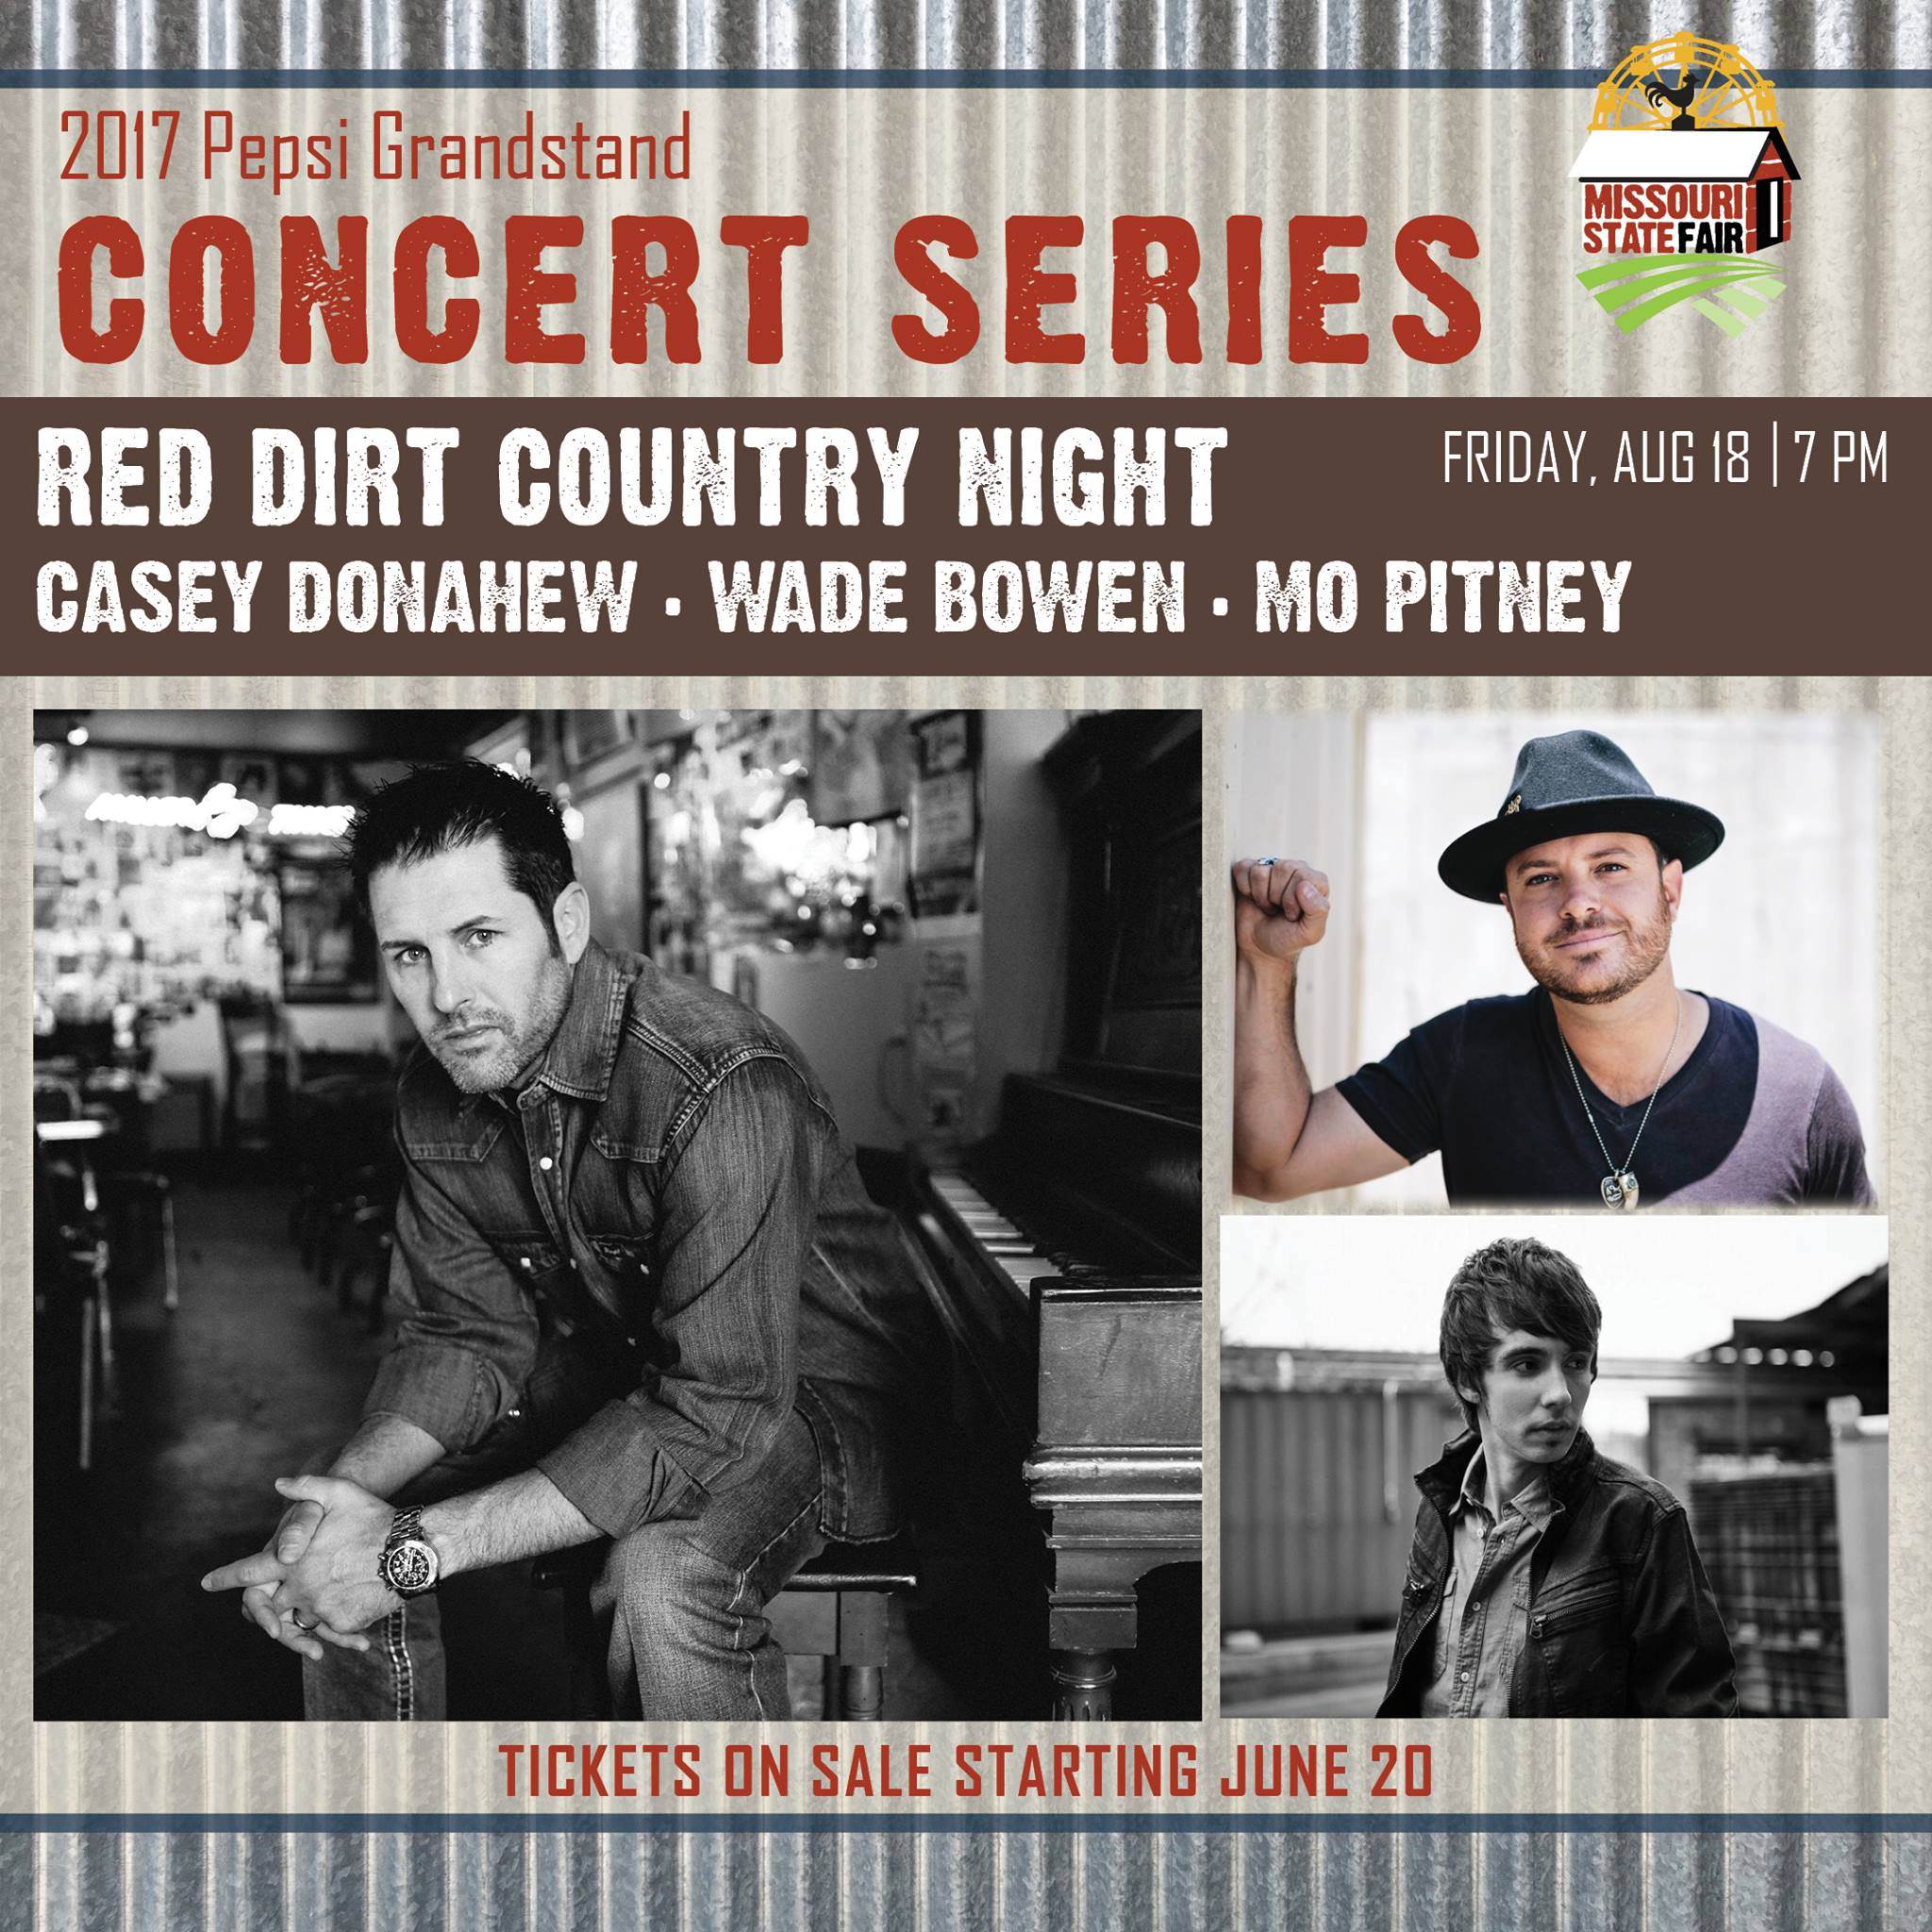 Red Dirt Country night at the Missouri State Fair announced